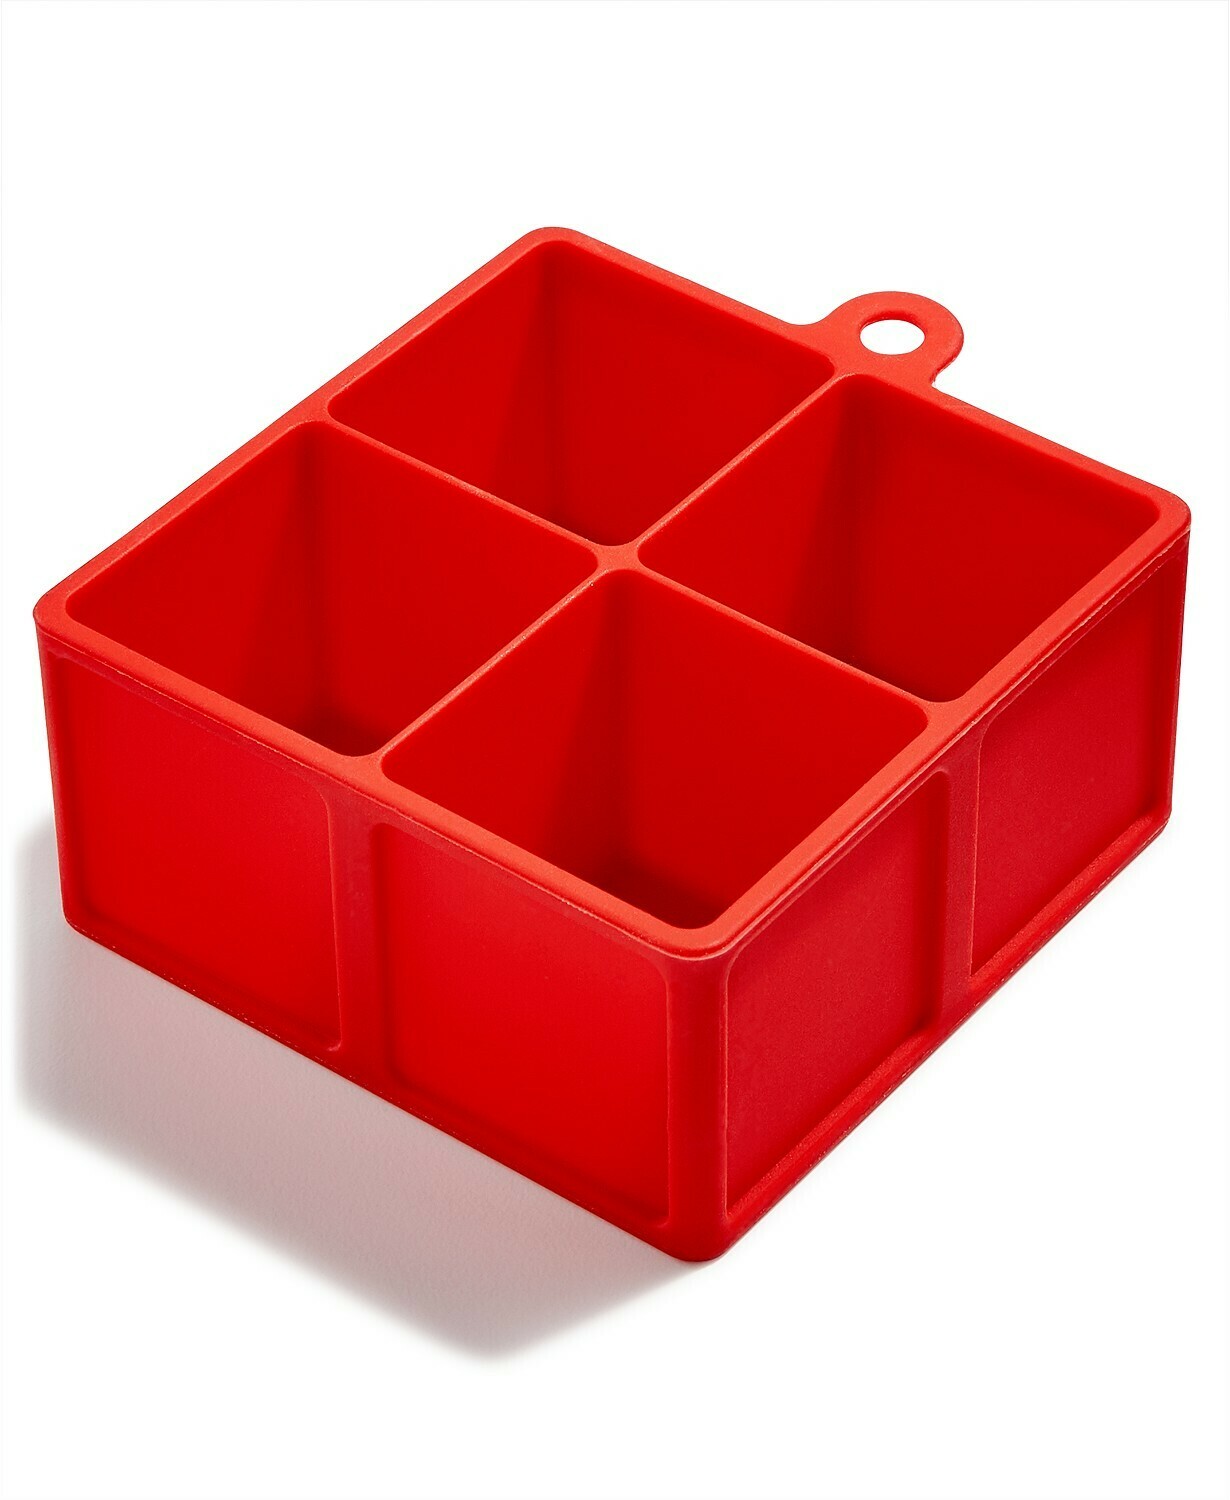 Art & Cook 4-Cube Ice Mold - Red